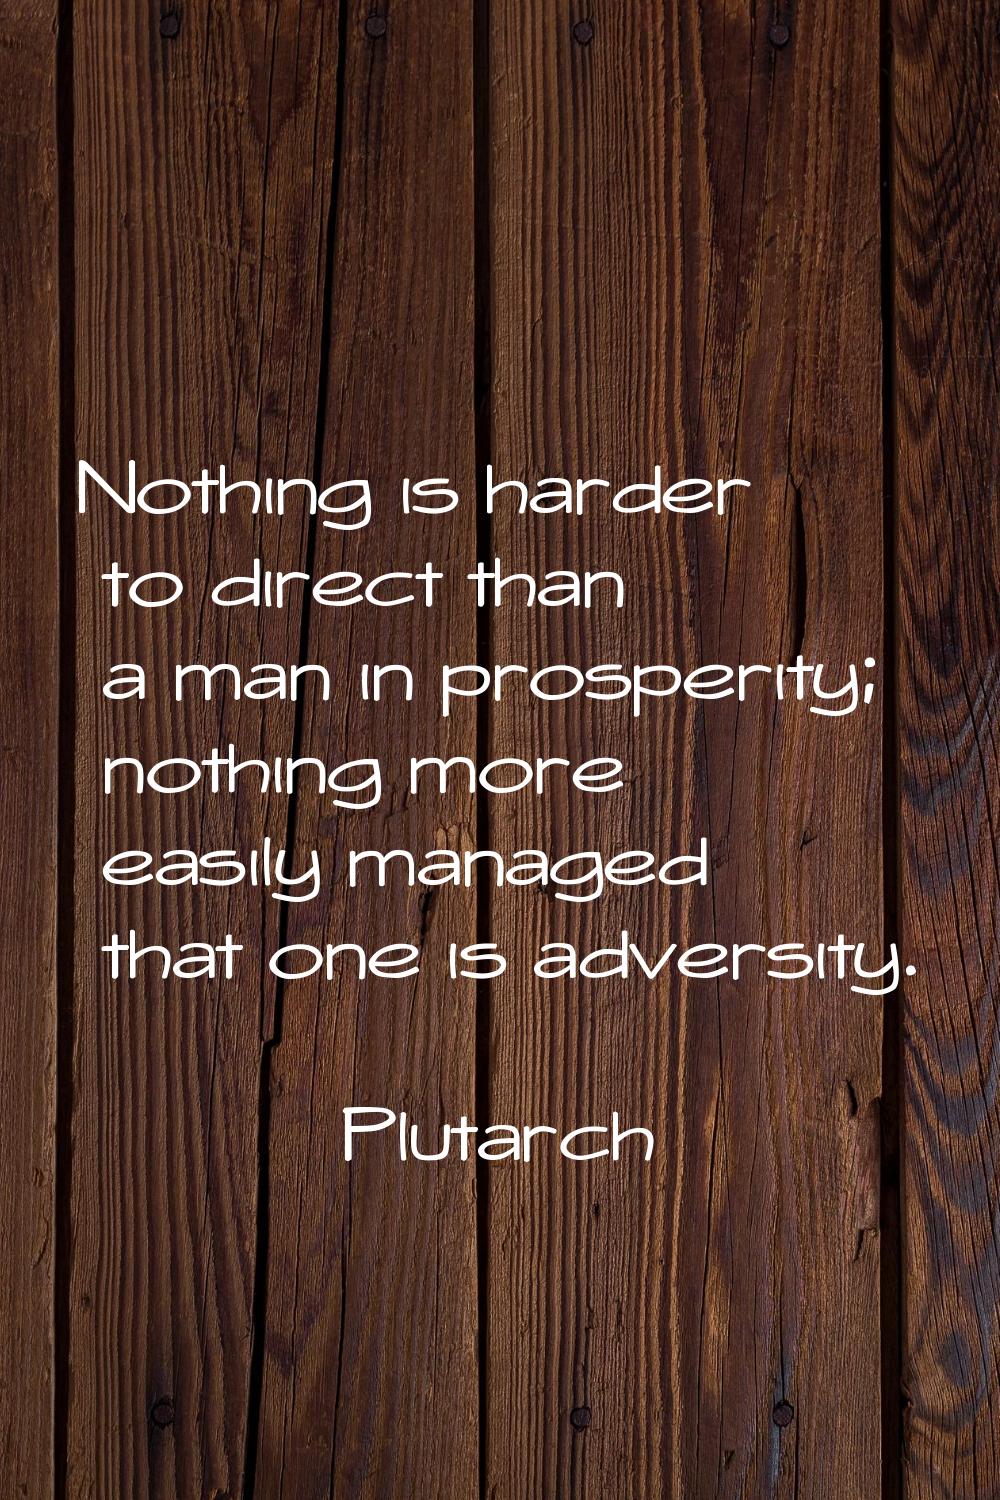 Nothing is harder to direct than a man in prosperity; nothing more easily managed that one is adver